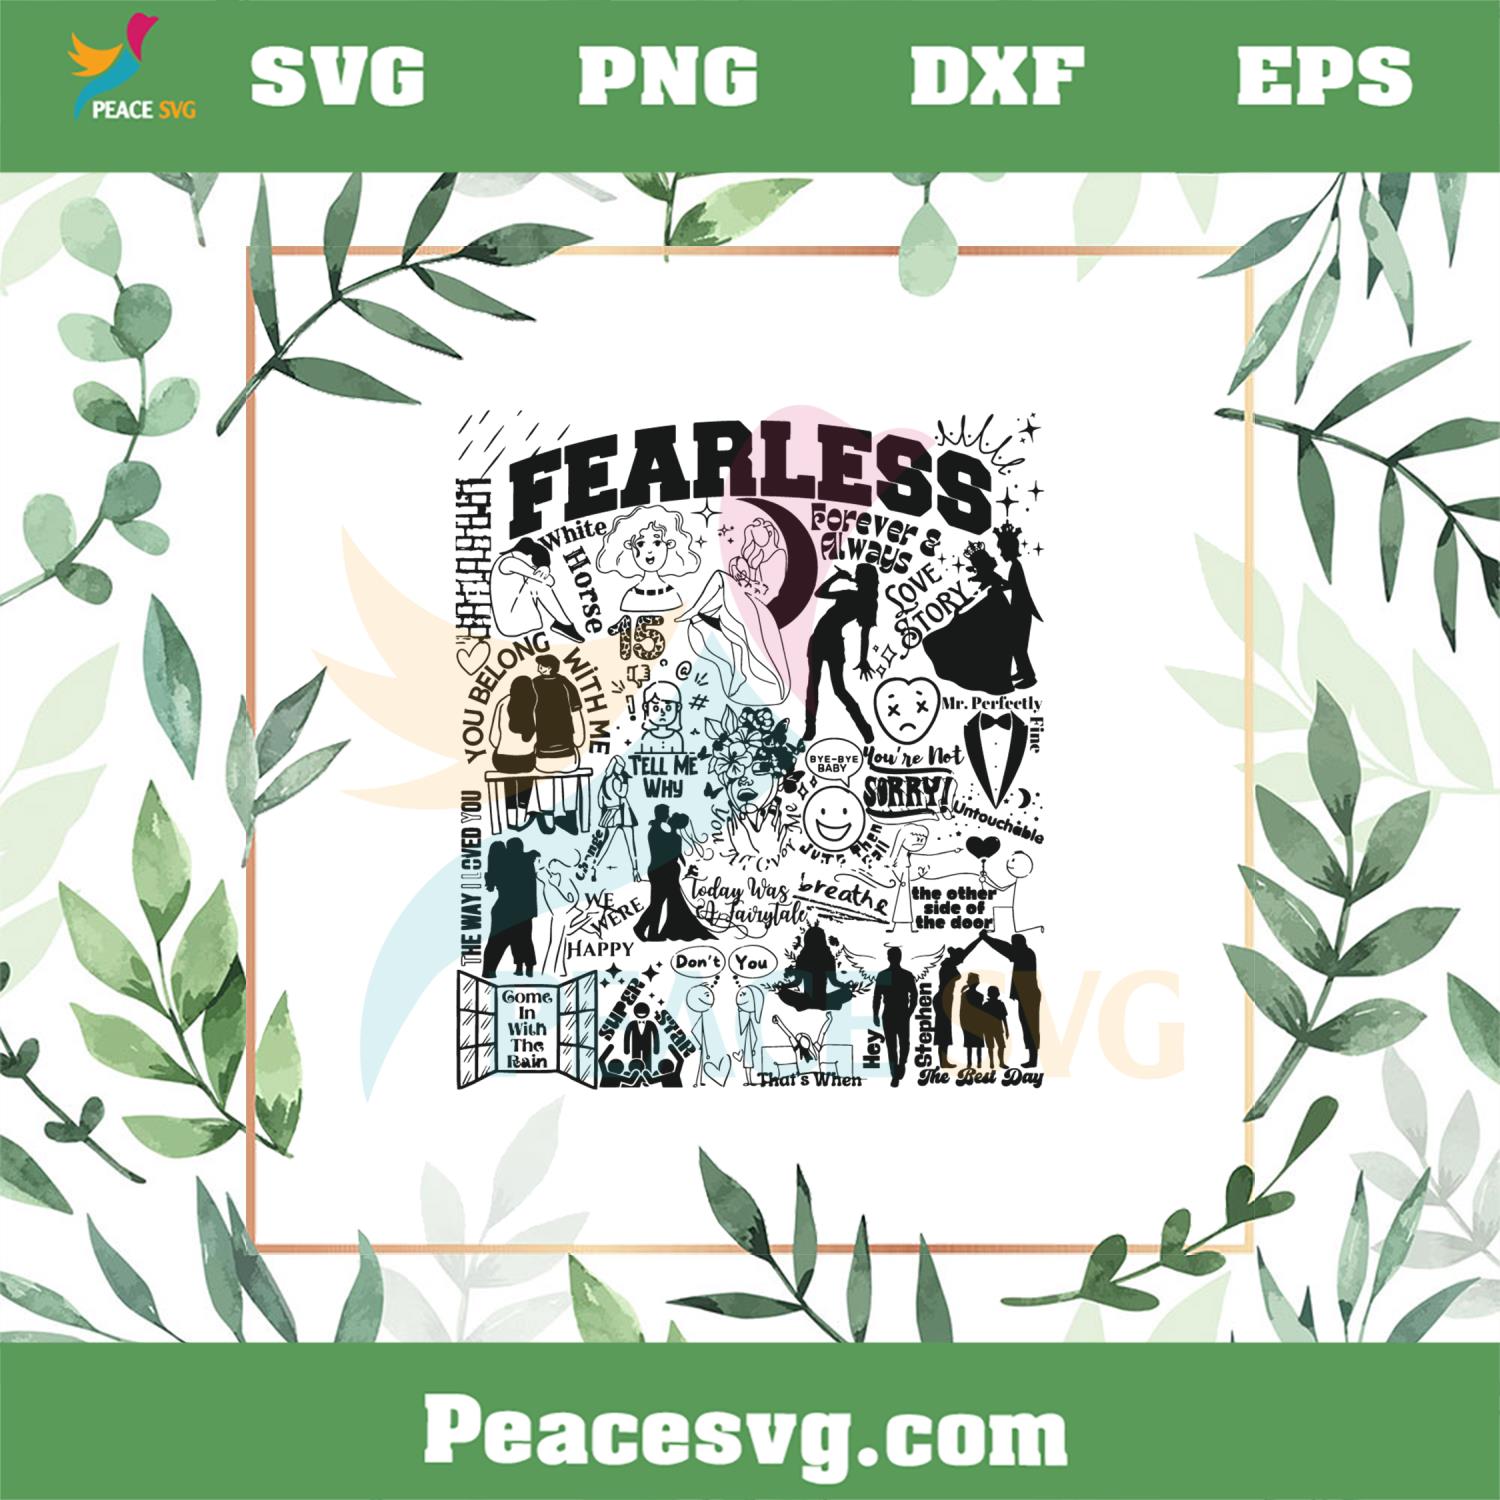 Fearless Taylor Swift Song Fearless Track List SVG Cutting Files